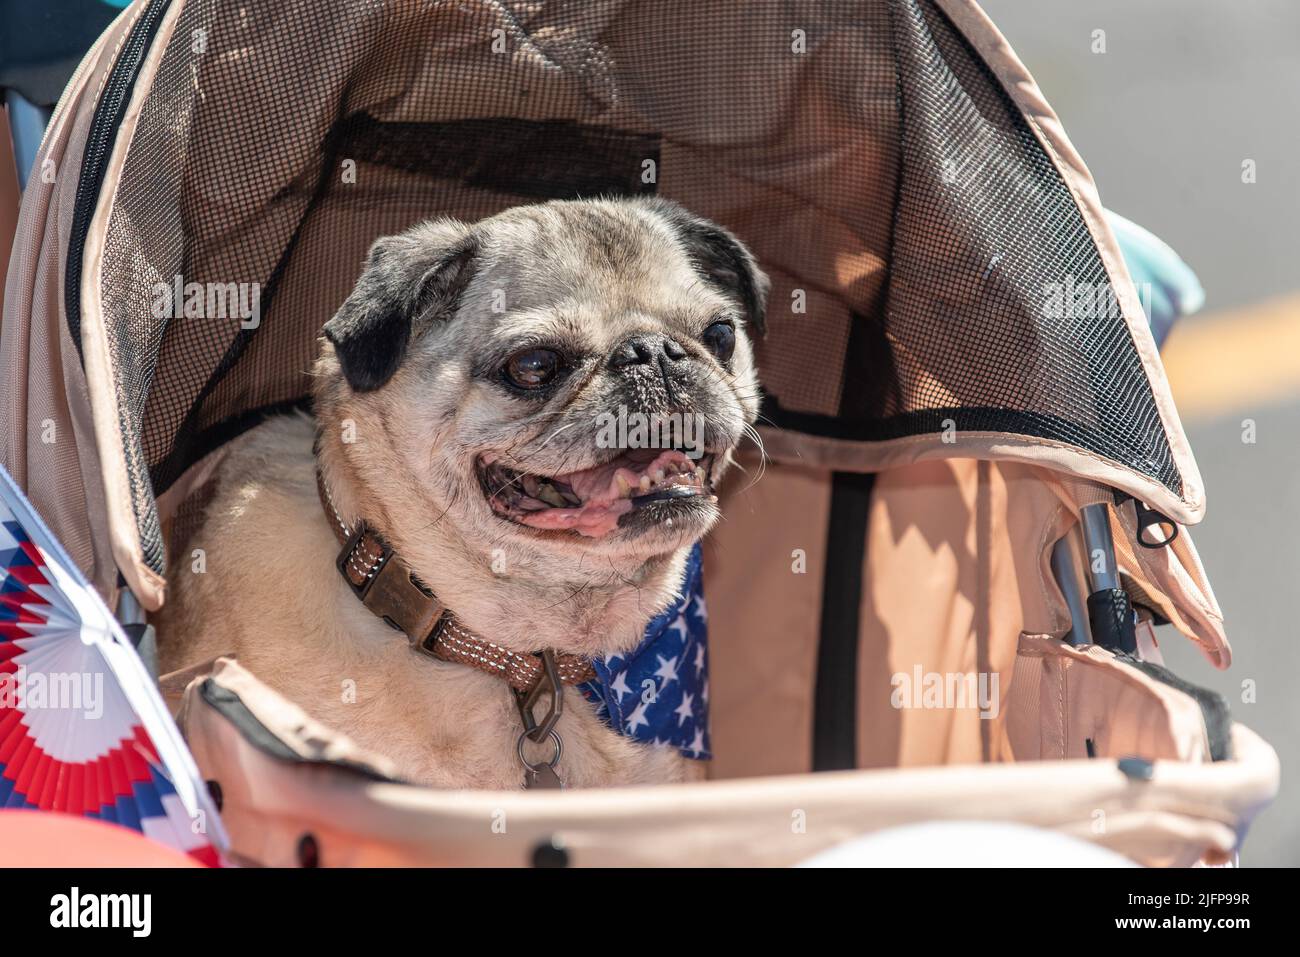 Holiday parade in small town is perfect place to walk the patriotic Pug dog in the stroller decorated in bunting, stars, and stripes. Stock Photo